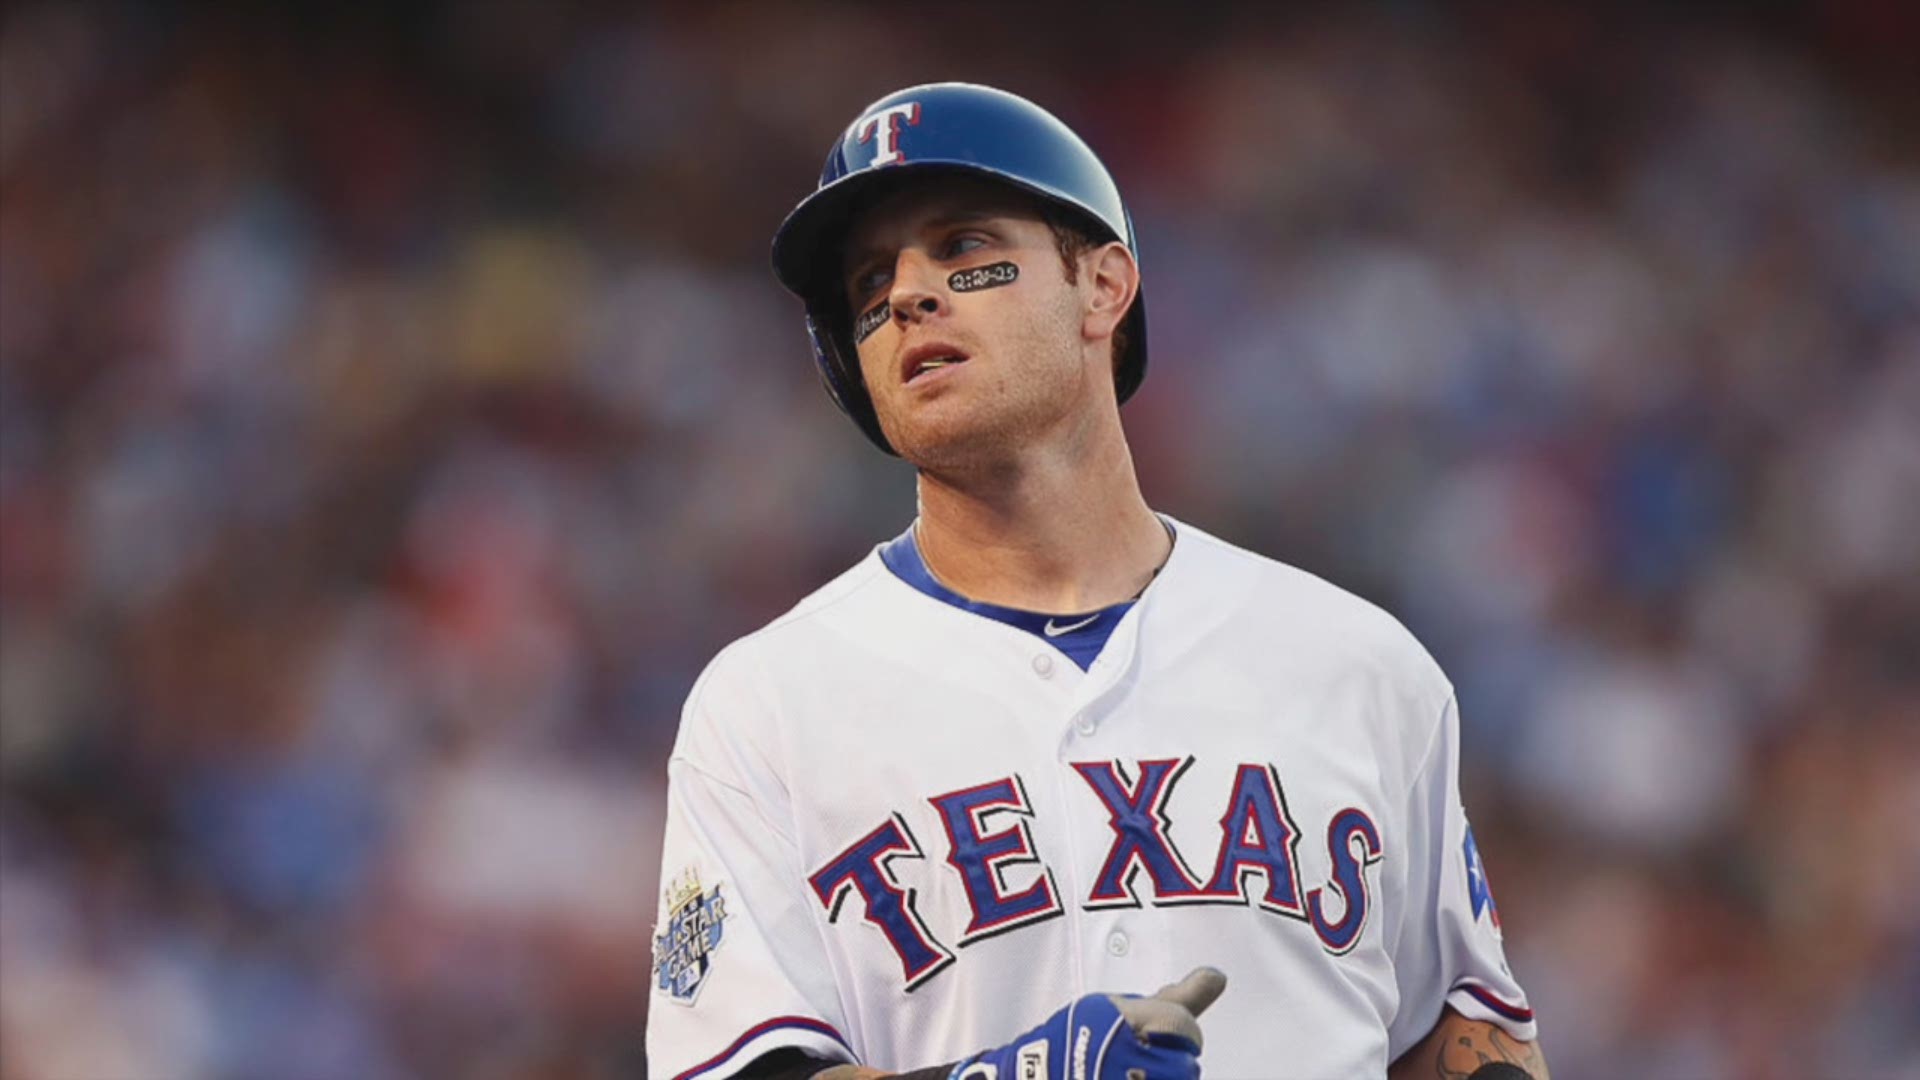 This is probably the end of the line for Josh Hamilton's career